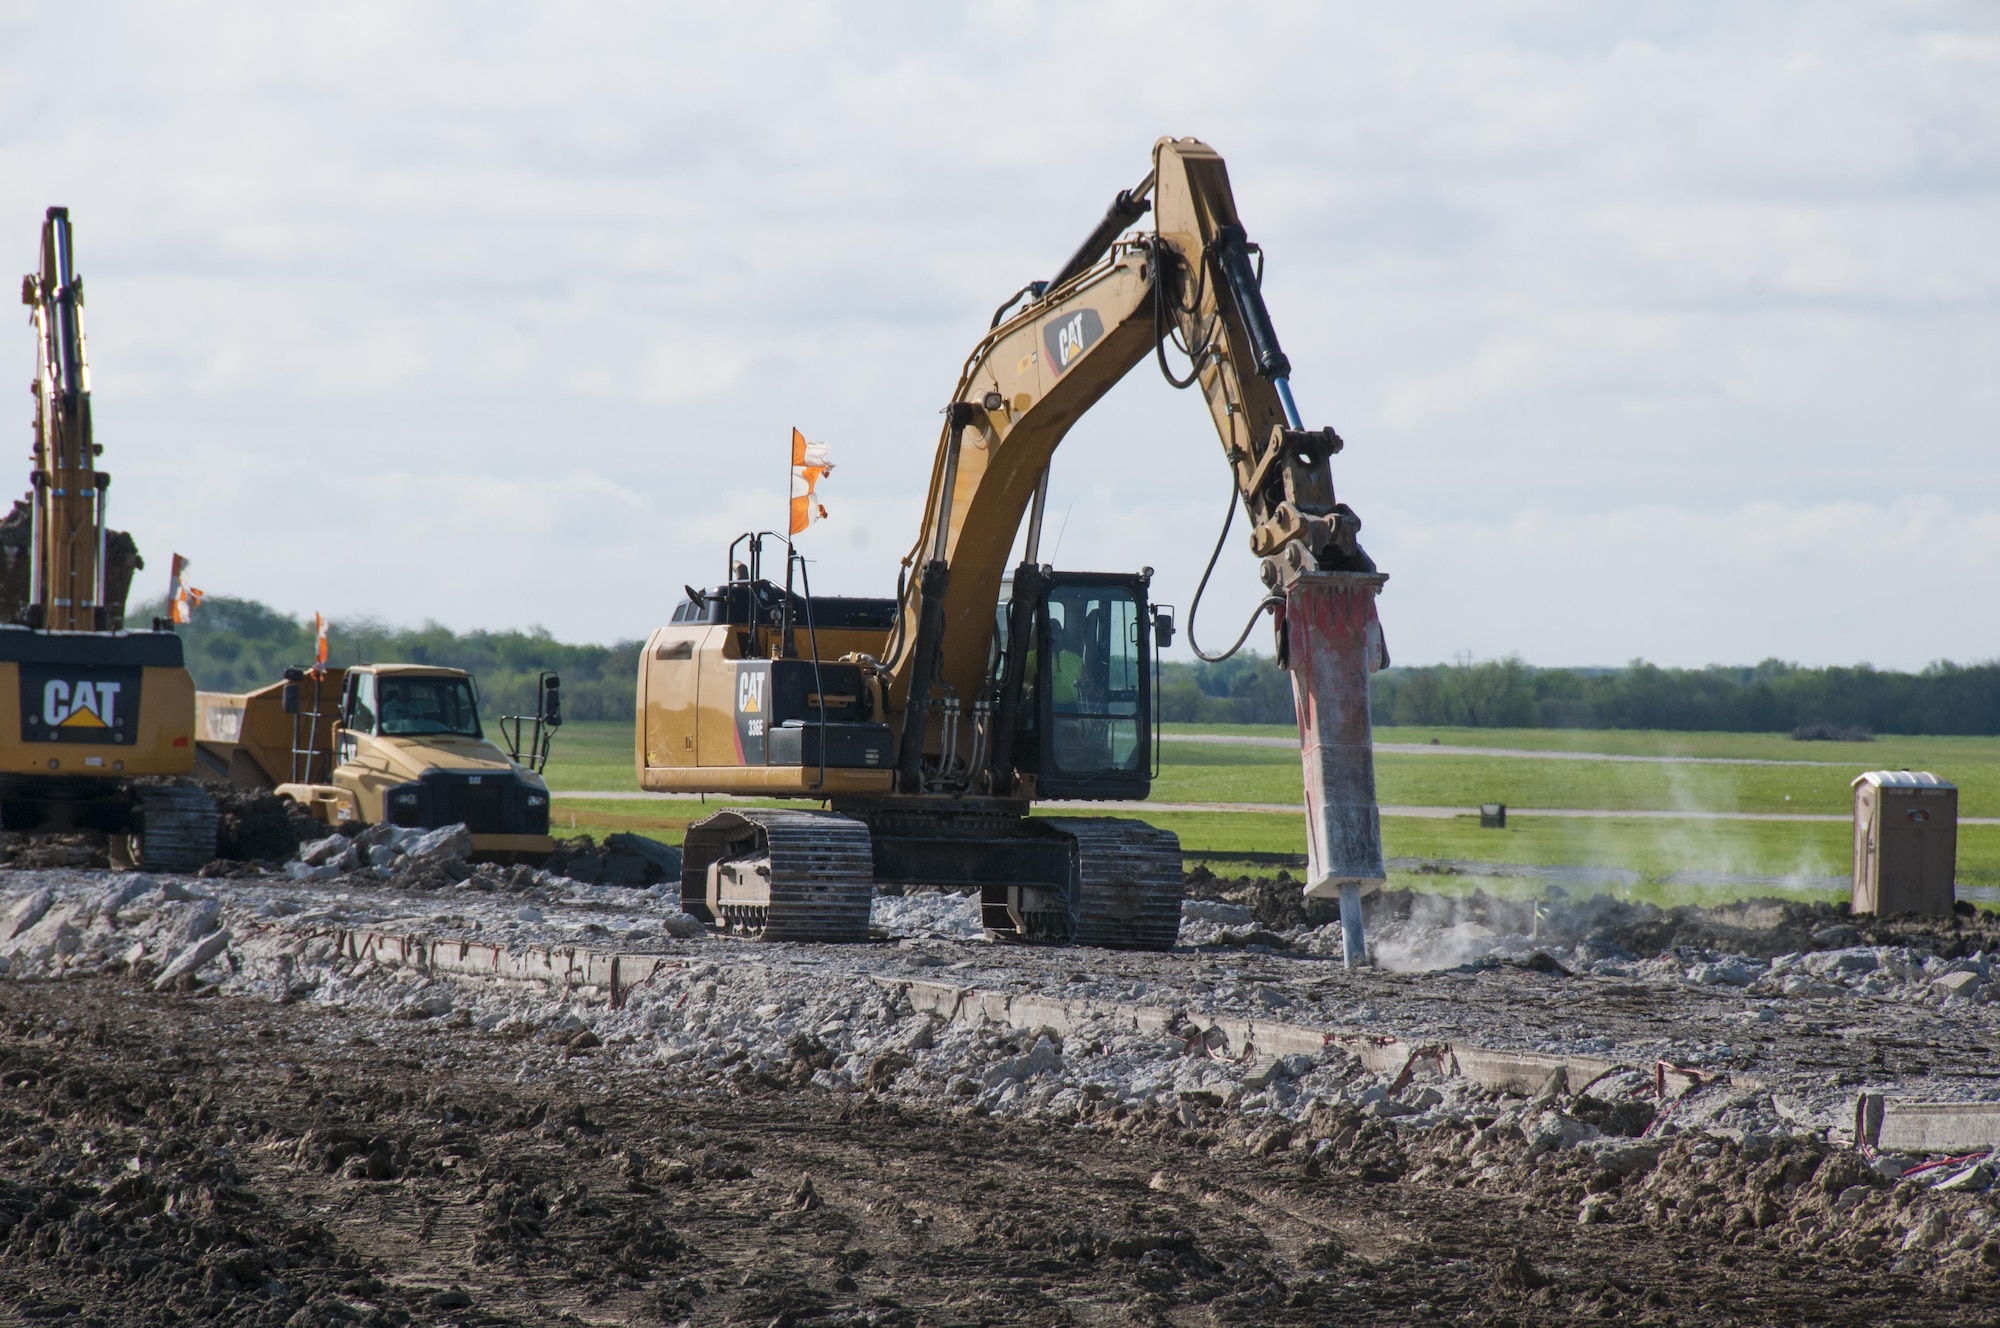 Construction vehicles break apart concrete at the demolition zone on the northwest half of the runway at Forbes Field Air National Guard Base, Topeka, Kan. April 20, 2017. Since February 2017, Forbes Field and local contractors have been performing a major construction overhaul on the runway to improve flight operations and ensure the safety of Airmen and aircraft alike. 